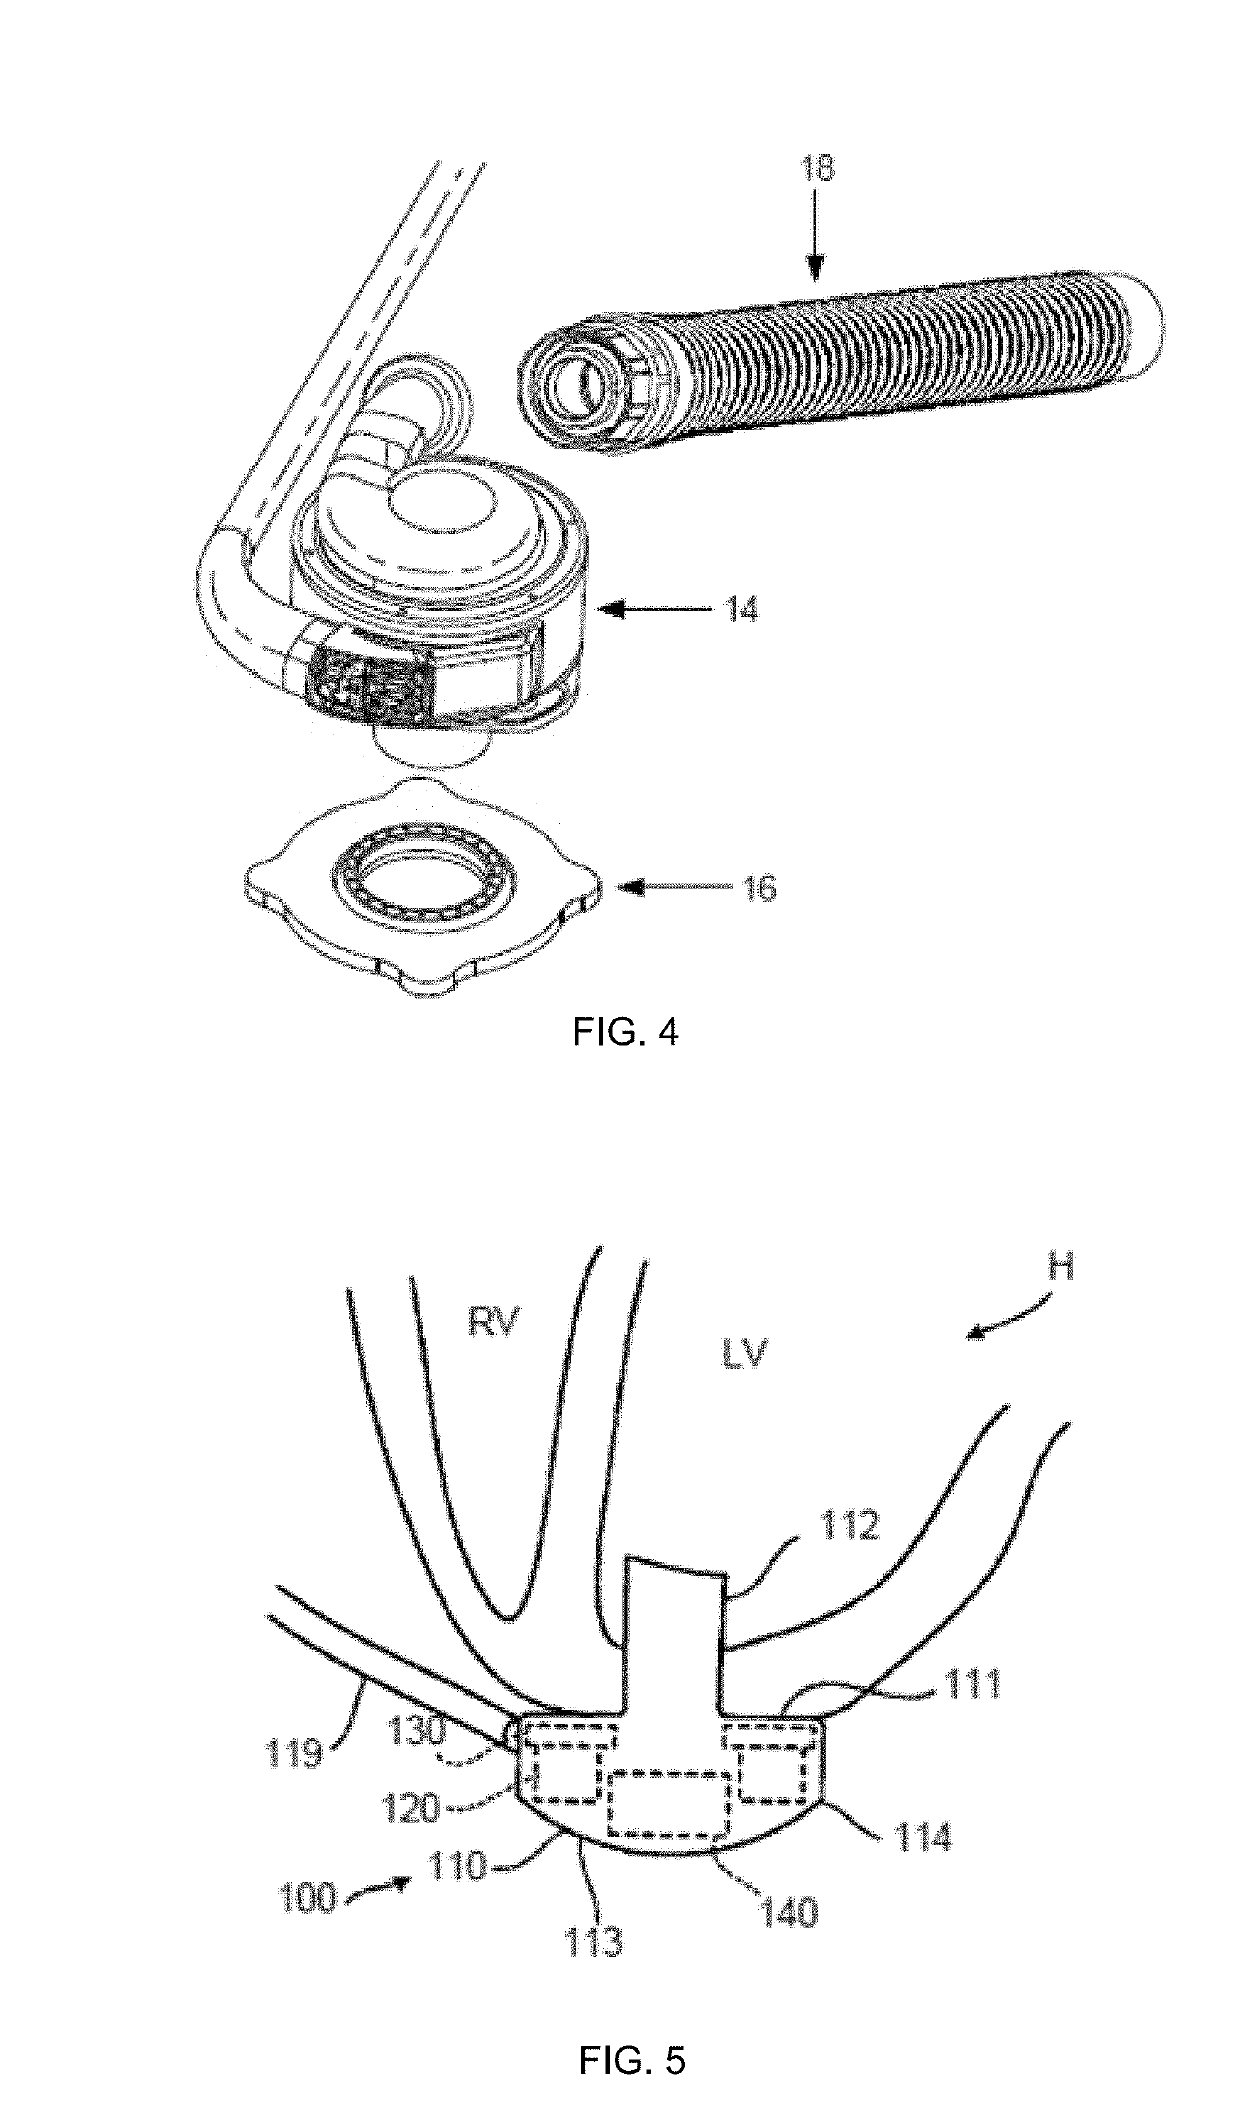 Mechanical Gauge for Estimating Inductance Changes in Resonant Power Transfer Systems With Flexible Coils for Use With Implanted Medical Devices